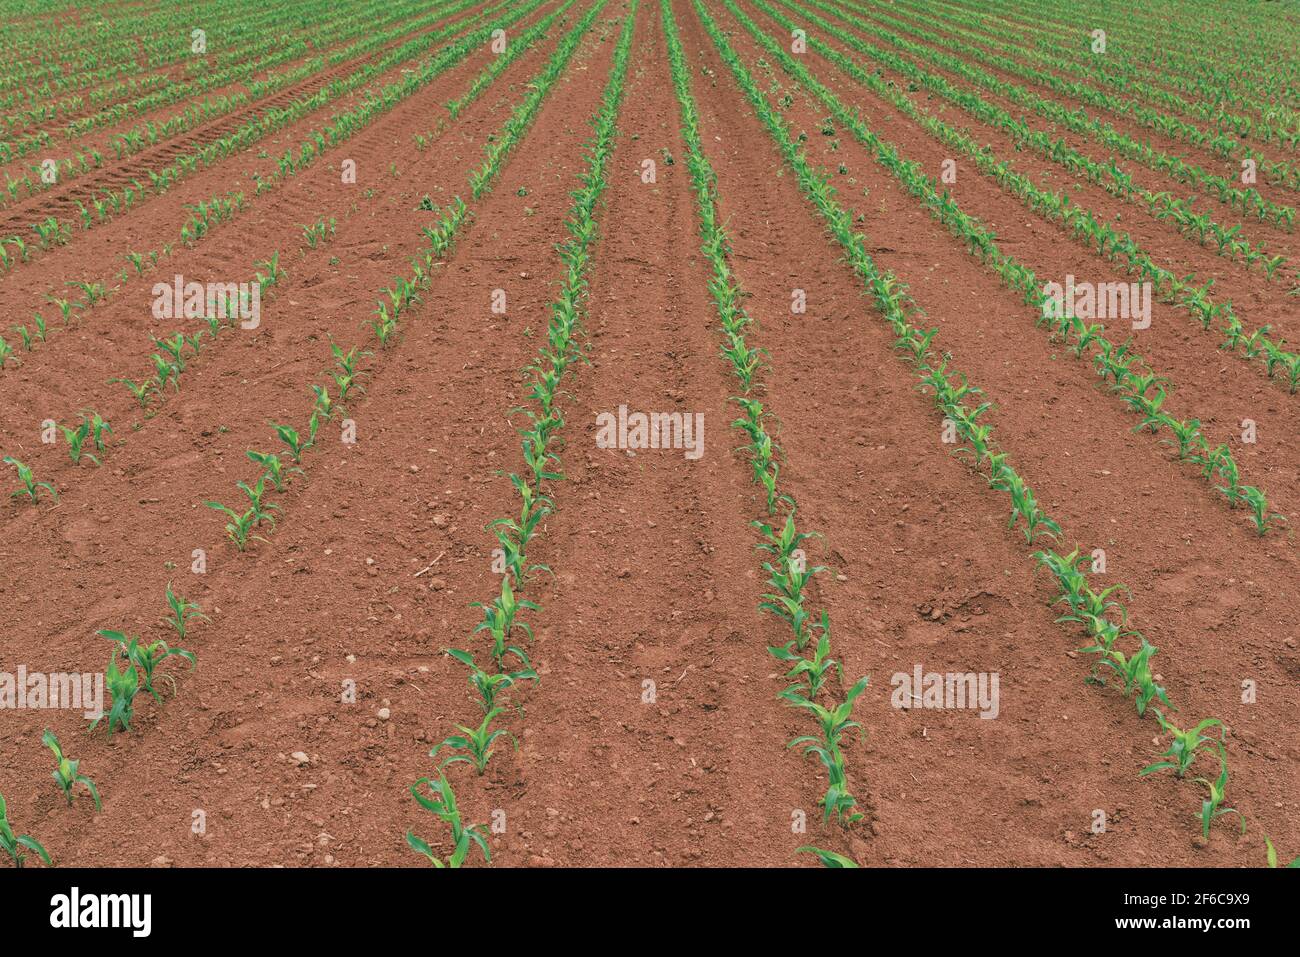 Rows of young green corn crops field in diminishing perspective, maize plantation in spring Stock Photo